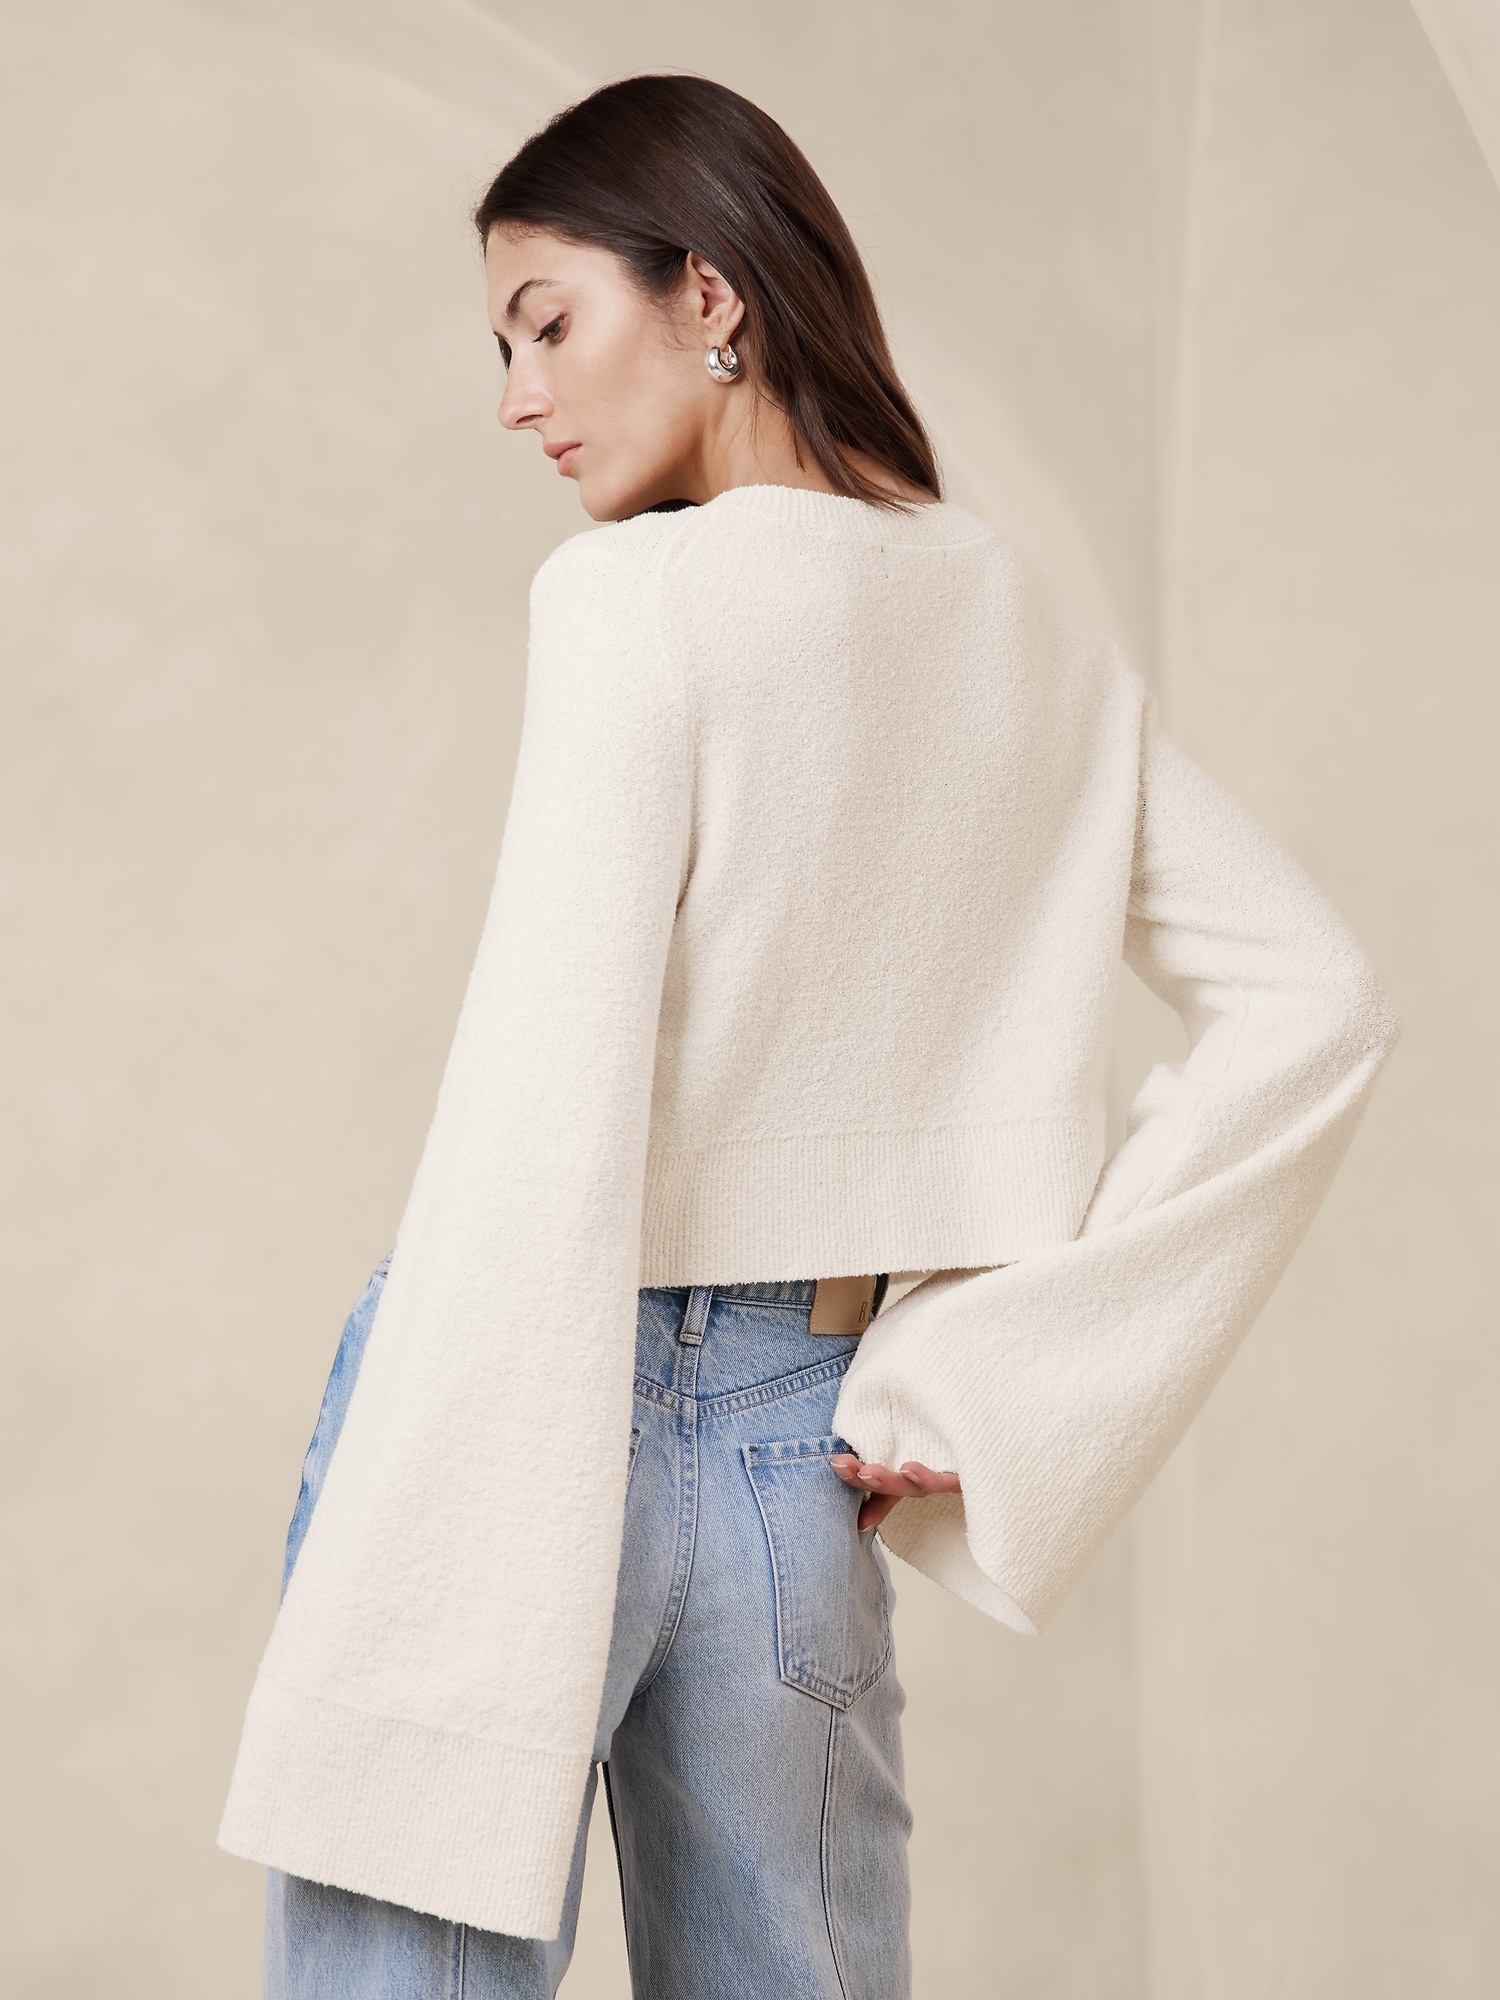 Lucia Cropped Cardigan